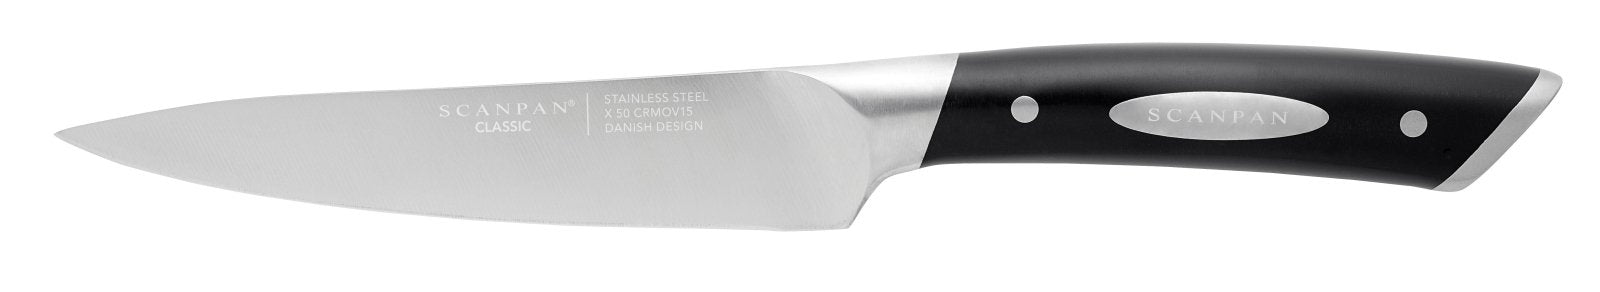 Scanpan Classic 15cm Utility Knife - SP92201500 - The Cotswold Knife Company